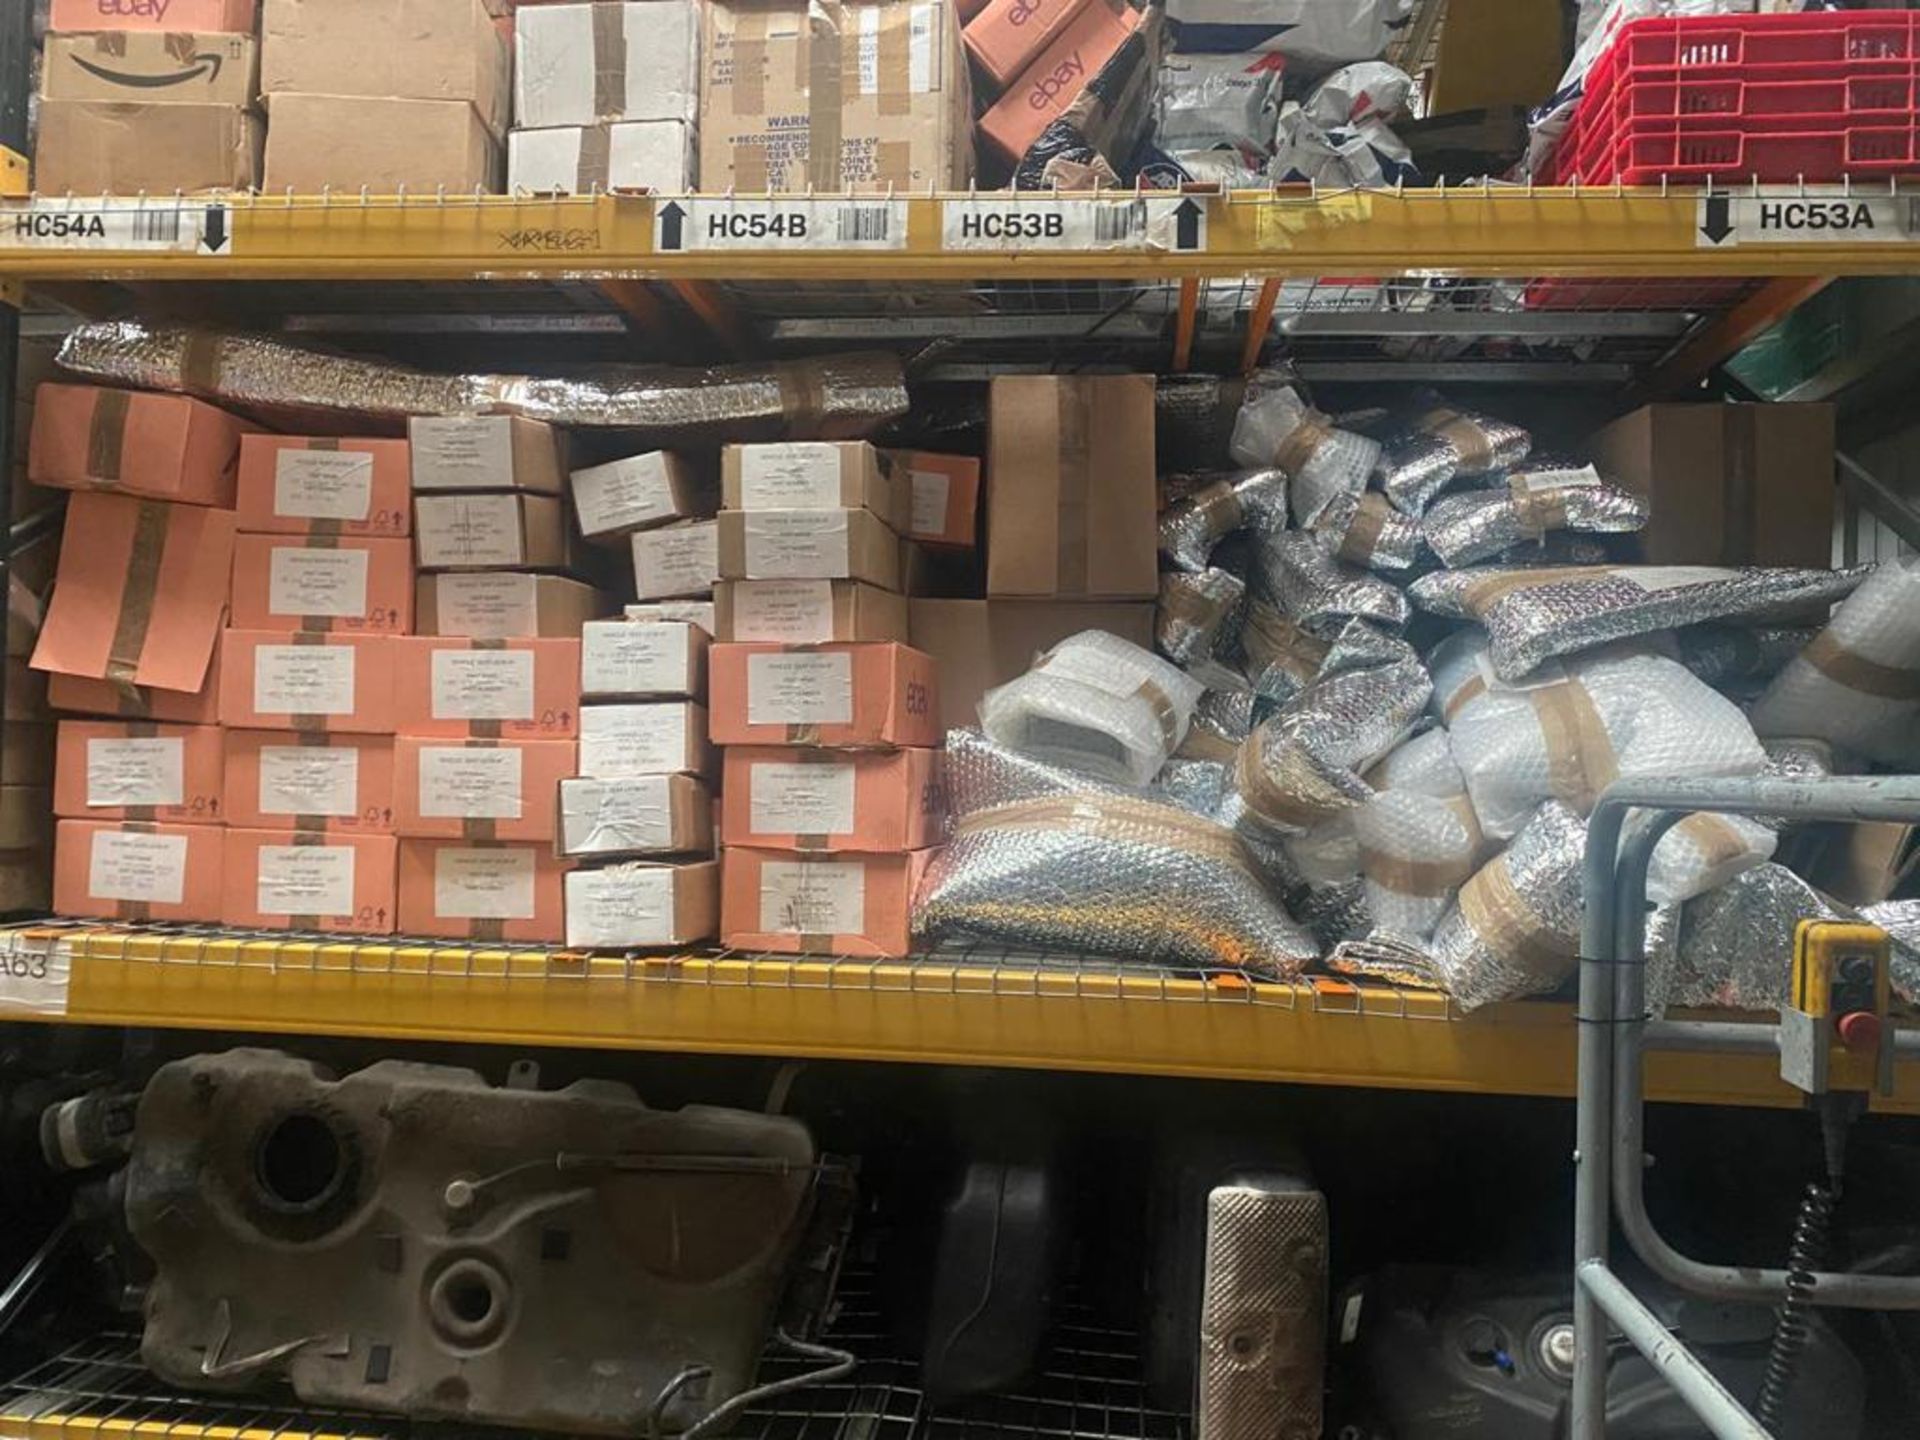 BULK ITEMS JOB LOT OF USED CAR PARTS - £350K ONGOING BUSINESS STOCK CLEARANCE FOR SALE! *NO VAT* - Image 79 of 95